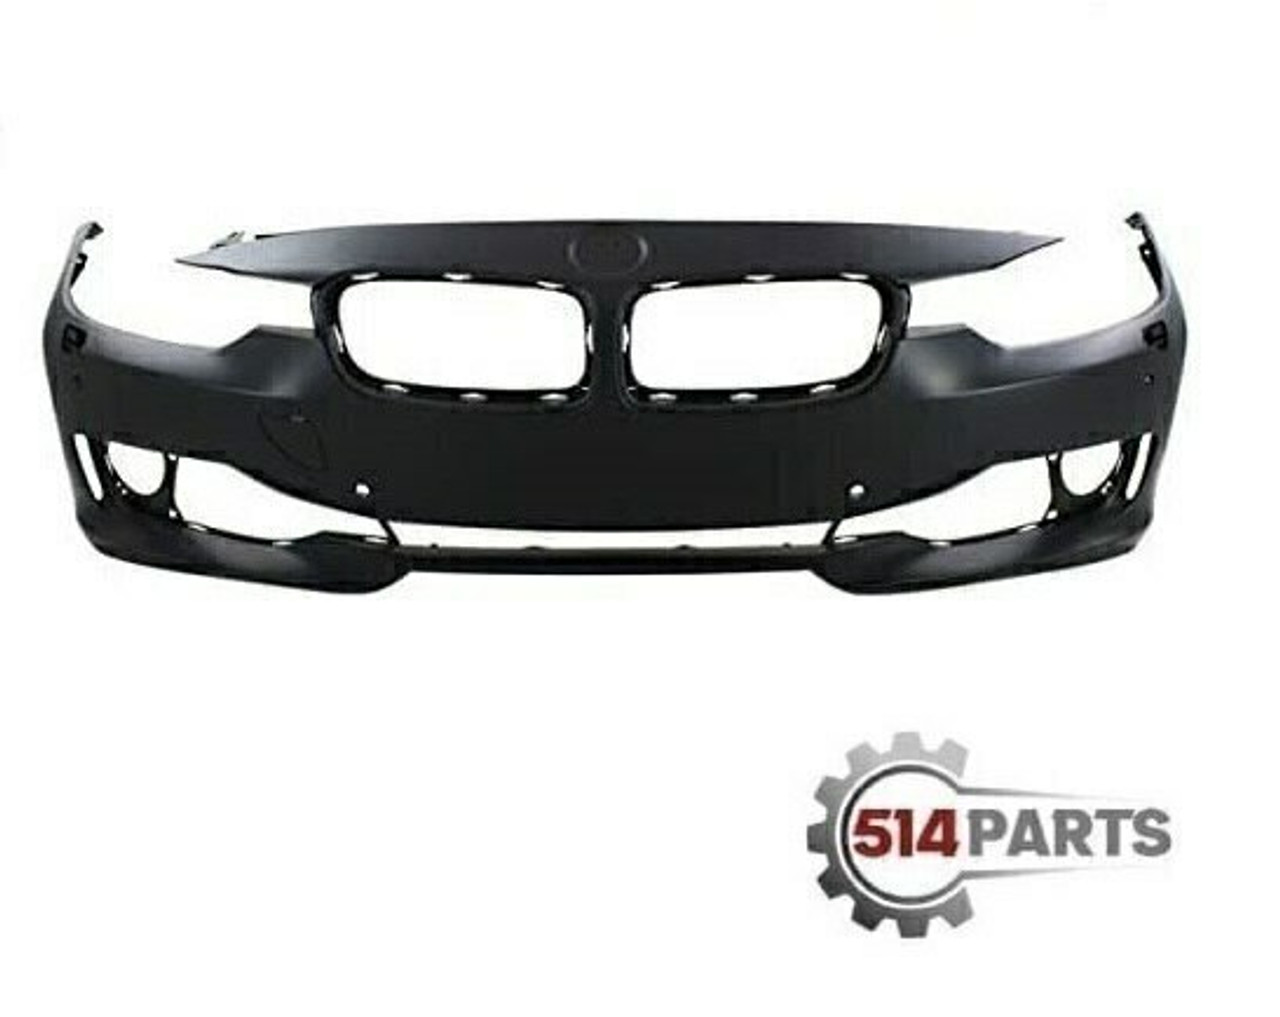 2012 - 2015 BMW 3 SERIES SEDAN/WAGON FRONT BUMPER WITH SENSOR WITH HEAD LIGHTS WASHER NO CAMERA NO PARK DISTANCE CONTROL WITH MOLDING - PARE-CHOCS AVANT AVEC SENSOR AVEC LAVE PHARES NO CAMERA NO PARK DISTANCE CONTROL AVEC MOLDING